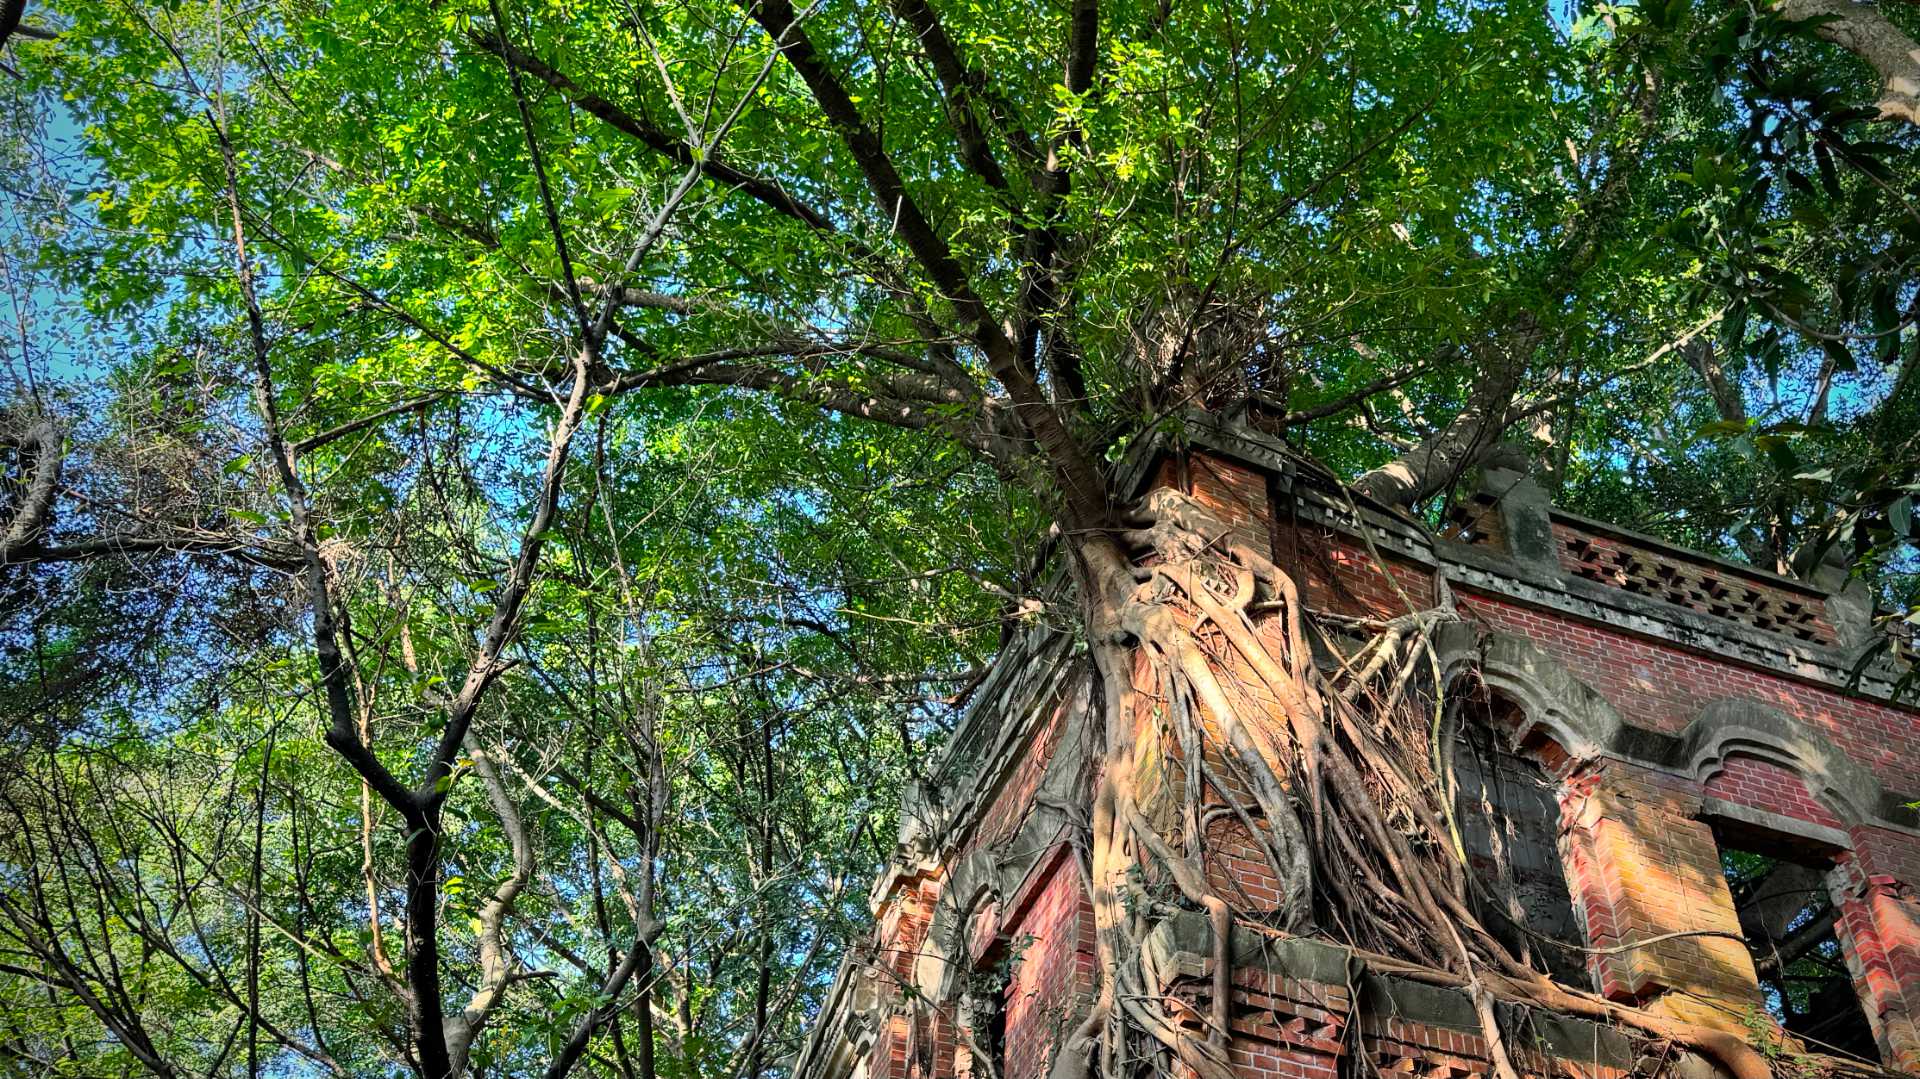 Close-up of a third-floor corner of the Minxiong Haunted House, showing large tree growing out from the brick wall. Its roots stretch down the wall and in through the windows. It has created a vibrant leafy canopy over the house.